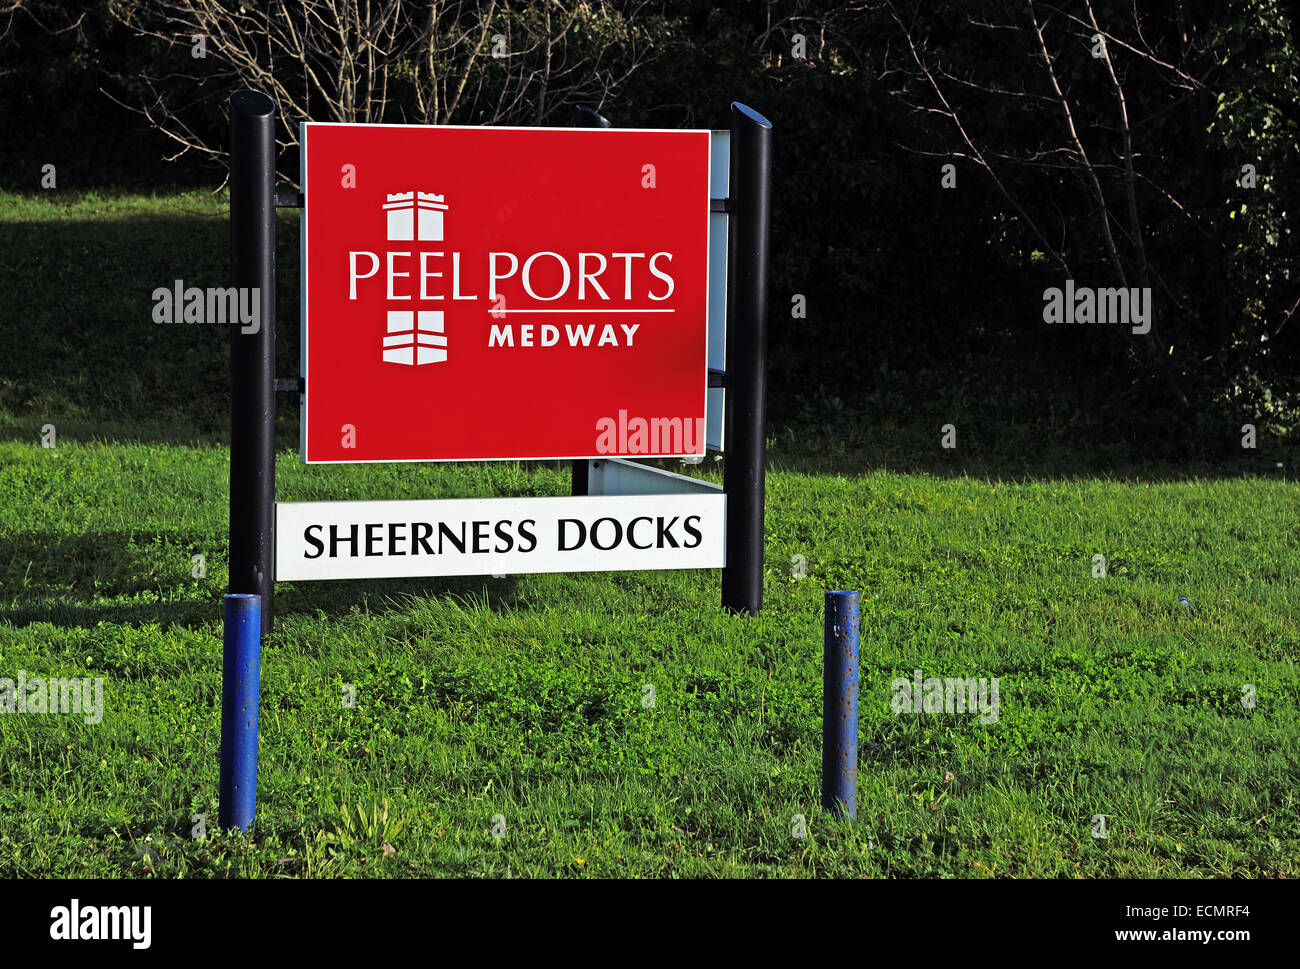 Sign at the entrance of Peel Ports Medway, Sheerness Docks, Sheppey, Kent Stock Photo